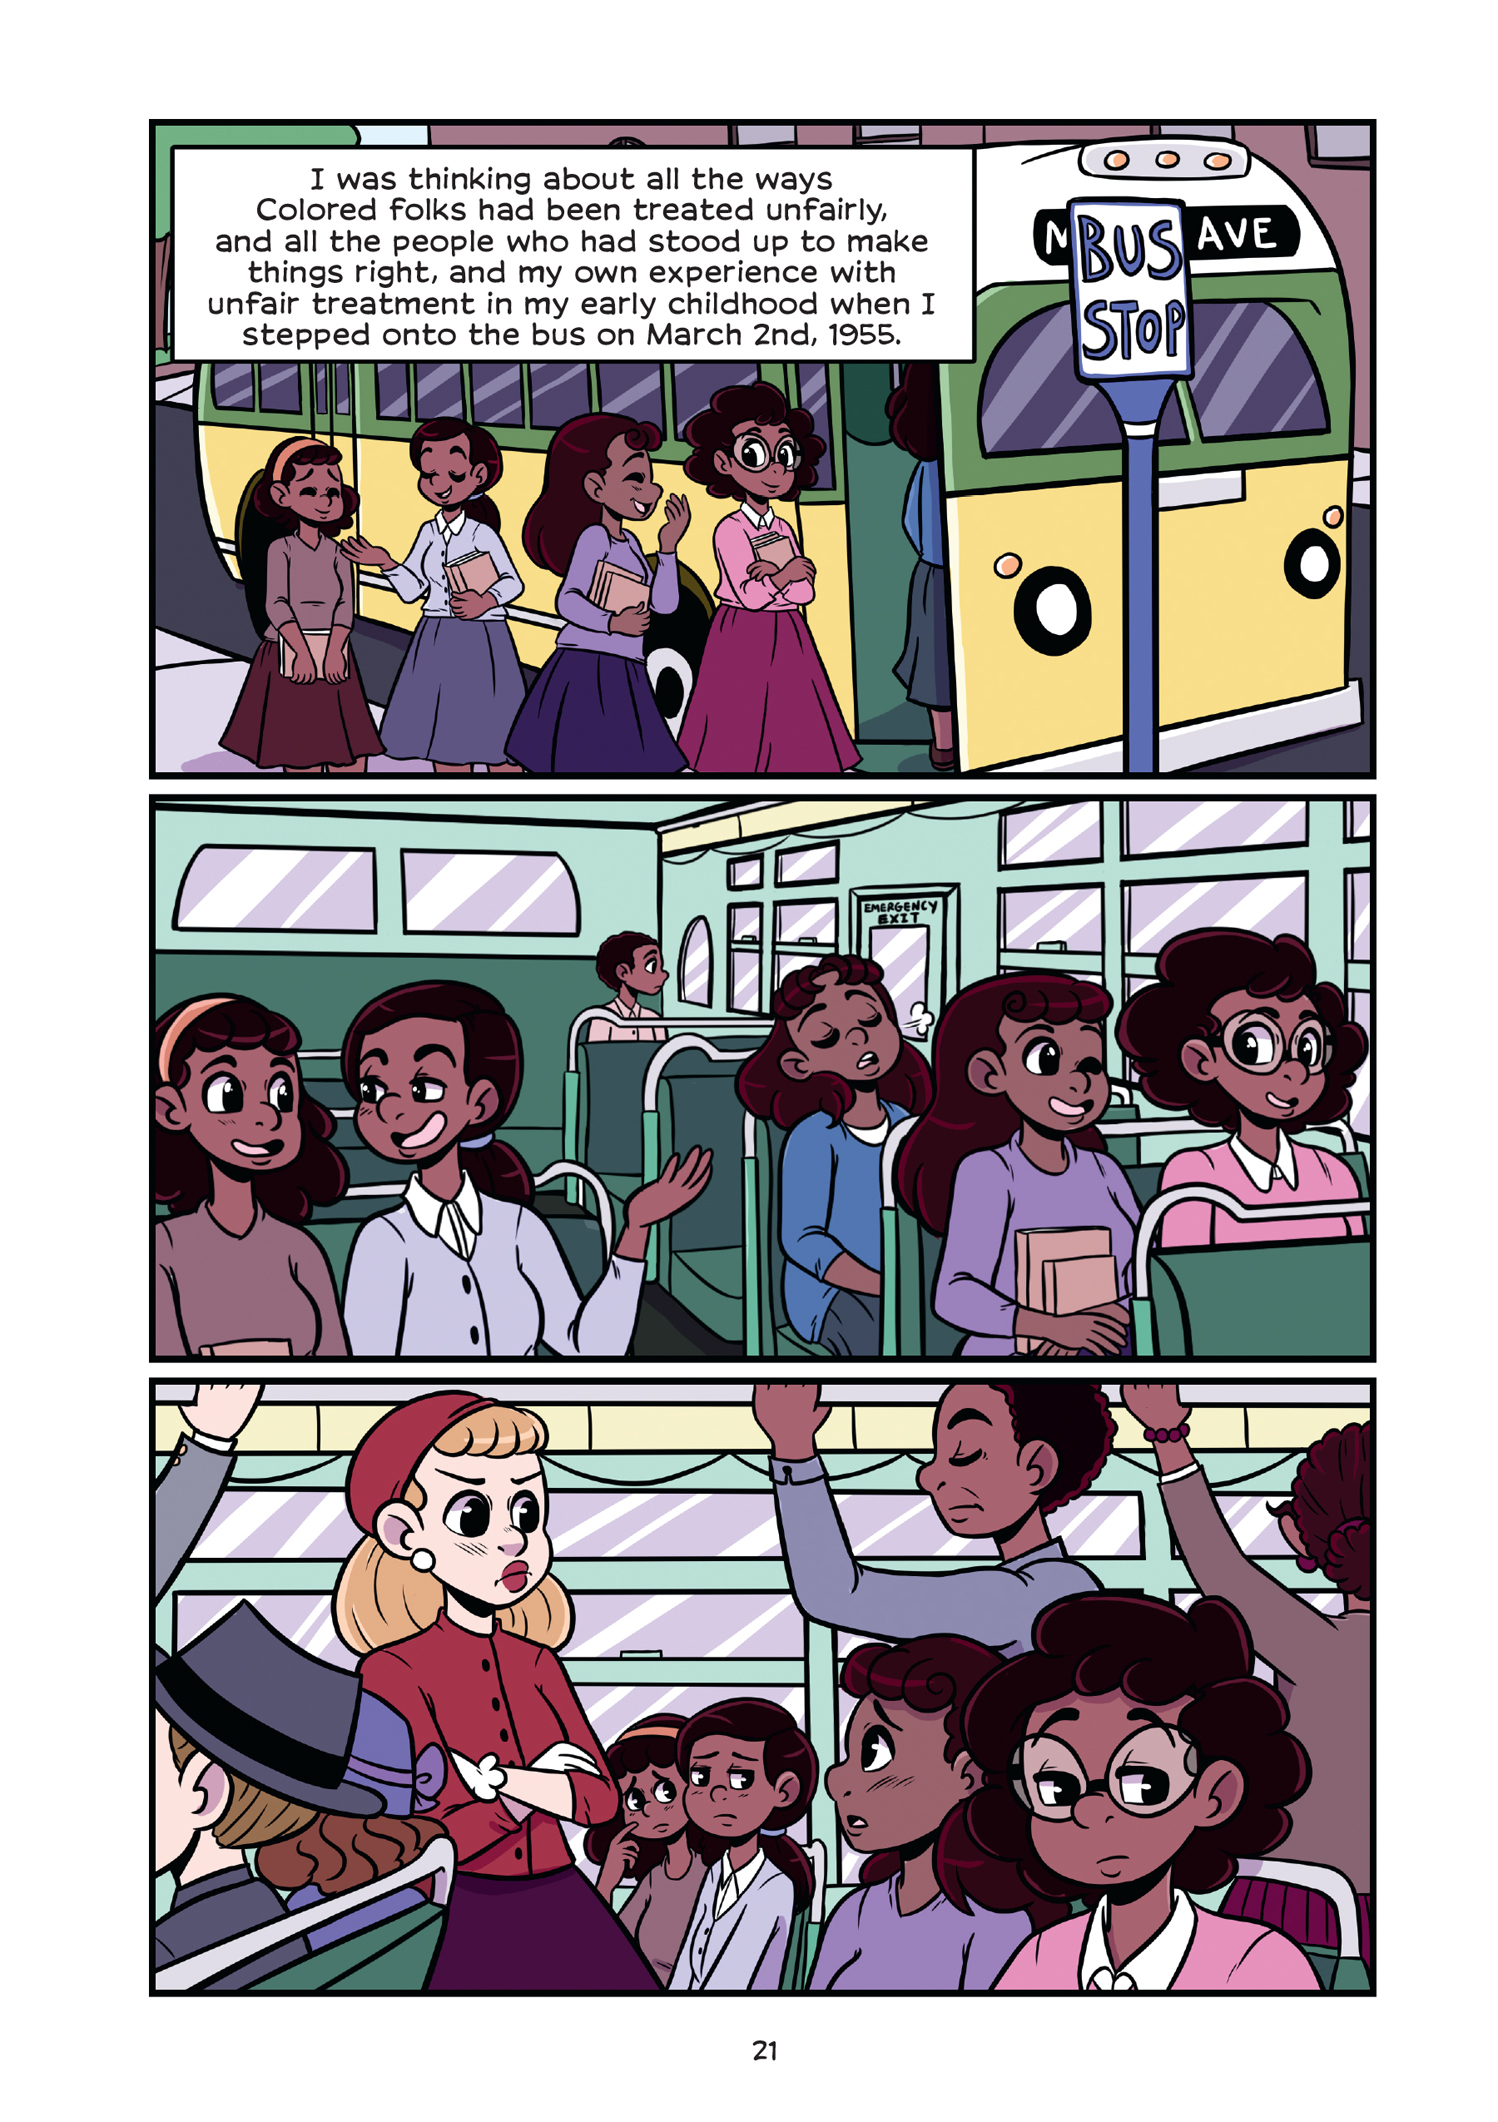 Read online History Comics comic -  Issue # Rosa Parks & Claudette Colvin - Civil Rights Heroes - 27